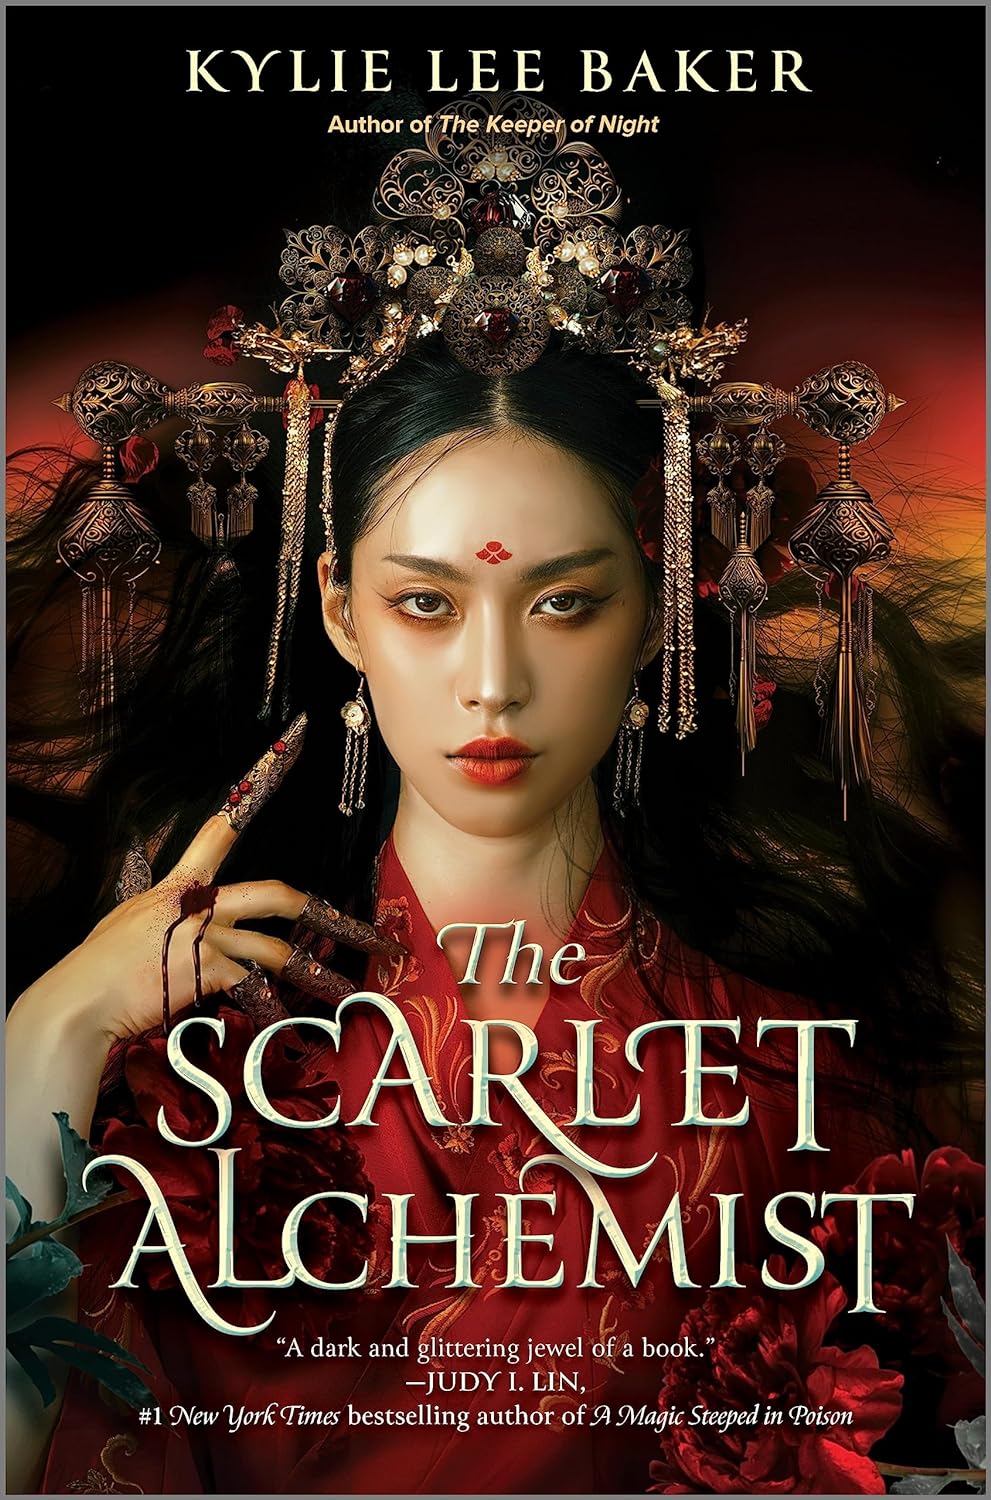 Cover for “The Scarlet Alchemist”